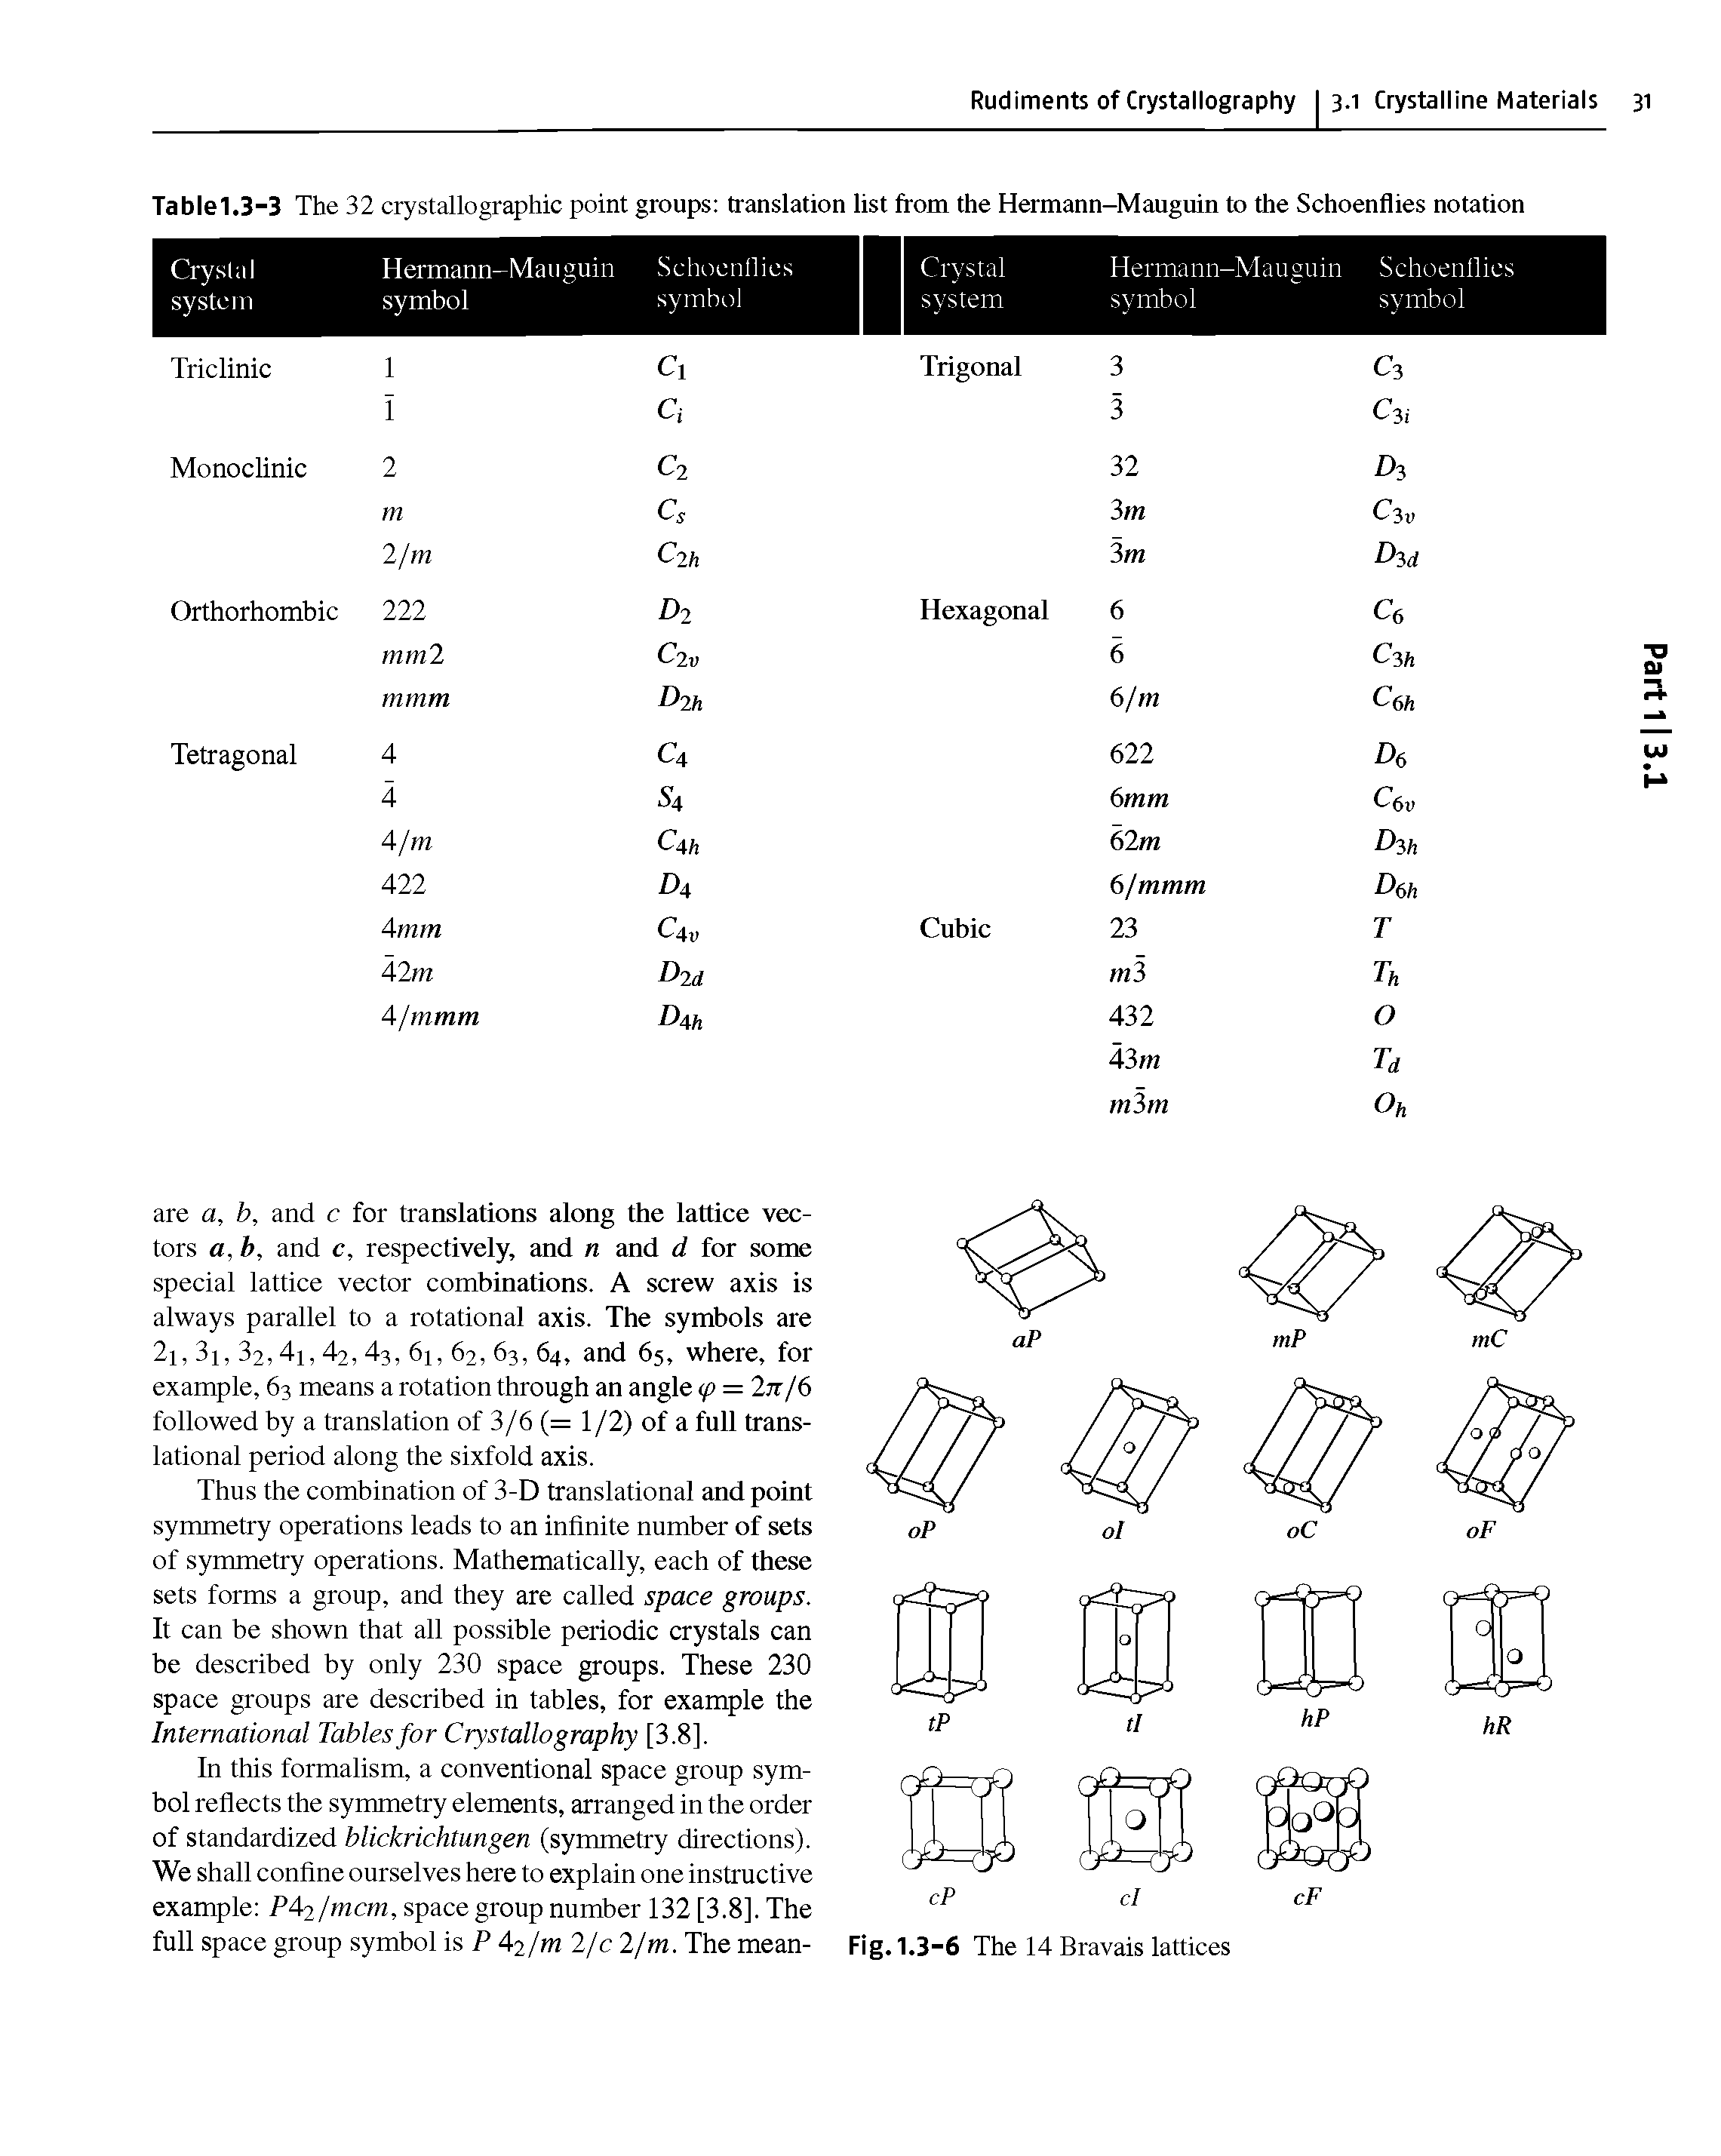 Table1.3-3 The 32 crystallographic point groups translation list from the Hermann-Mauguin to the Schoenflies notation...